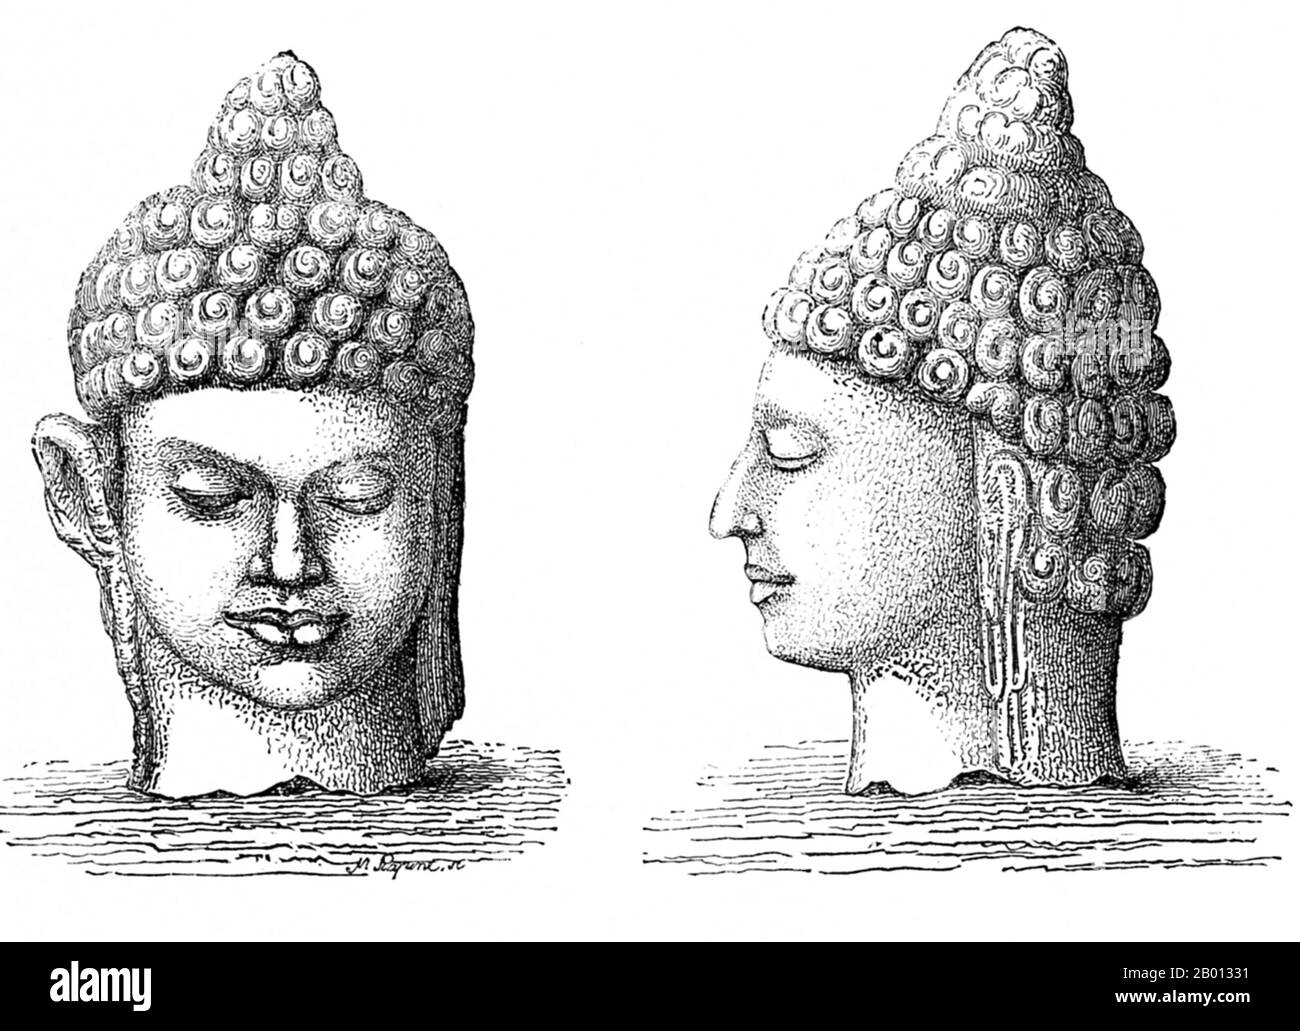 Laos: Two Buddha heads from a ruined monastery in Champasak. Redrawn from an engraving by Louis Delaporte (1842-1925), 1867.  The Kingdom of Champasak (1713-1946) was a kingdom in southern Laos that broke away from the Lan Xang kingdom in 1713. Champasak prospered at the beginning the 18th century, but it was reduced to a vassal state of Siam before the century had passed. Under French rule the kingdom was known as Bassac and became an administrative block with its royalty stripped of many of its privileges. The Kingdom of Champasak was abolished in 1946 when the Kingdom of Laos was formed. Stock Photo